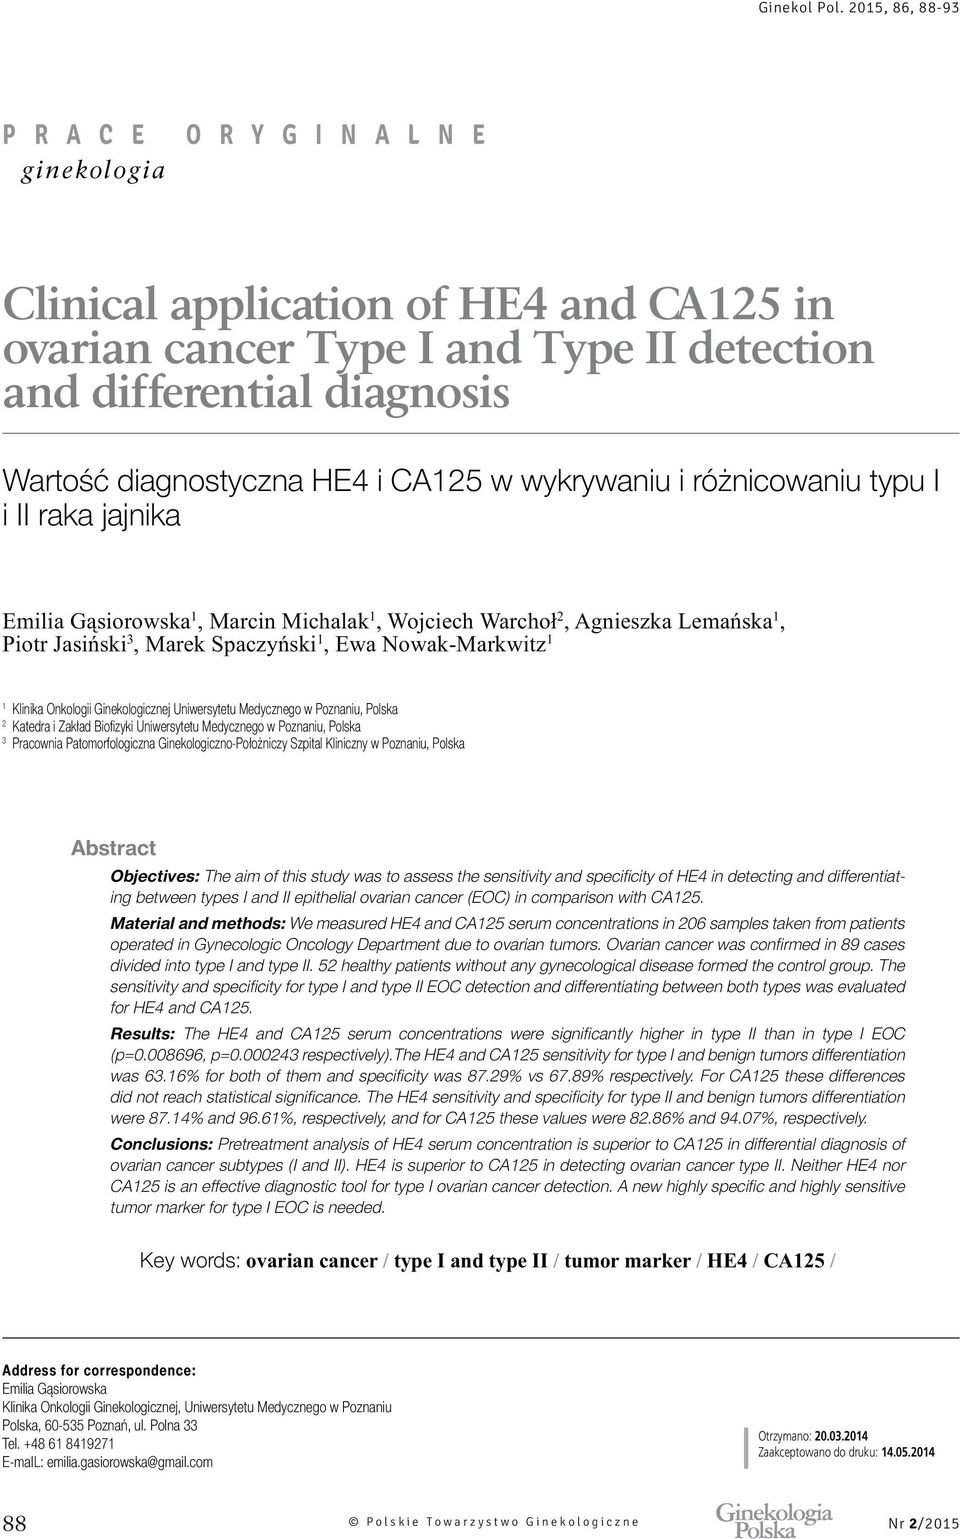 Ginekologiczno-Położniczy Szpital Kliniczny w Poznaniu, Polska Abstract Objectives: The aim of this study was to assess the sensitivity and specificity of HE4 in detecting and differentiating between